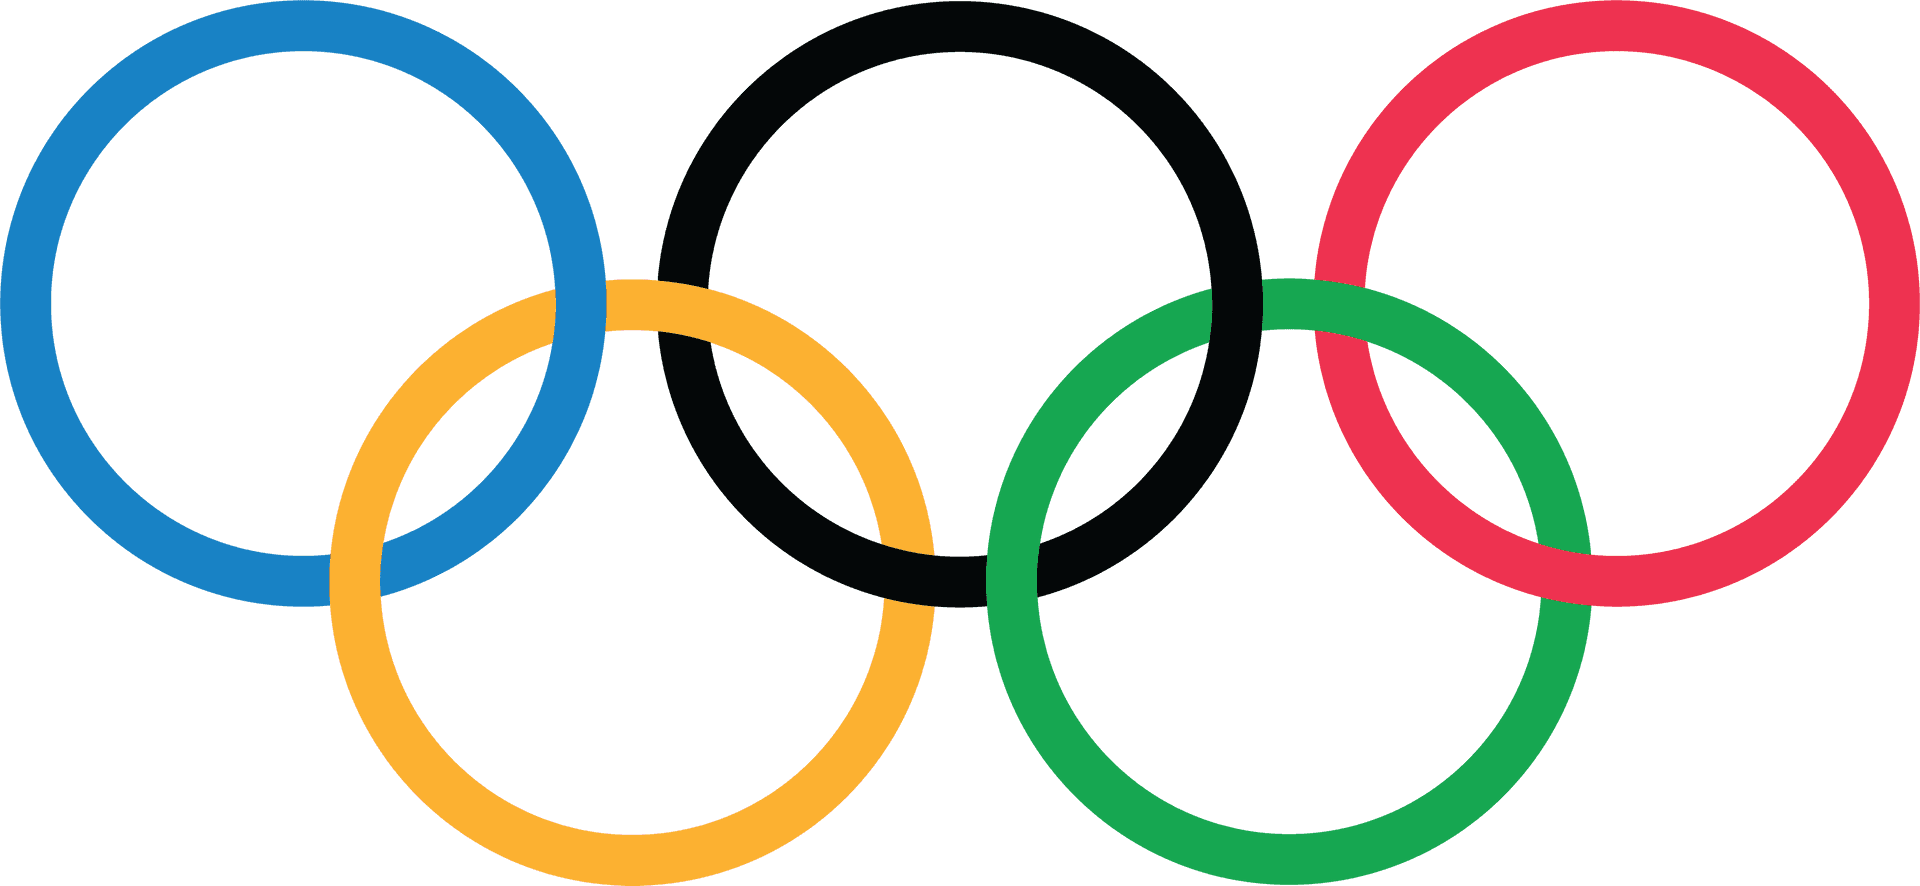 Olympic_ Rings_ Official_ Symbol.png PNG image